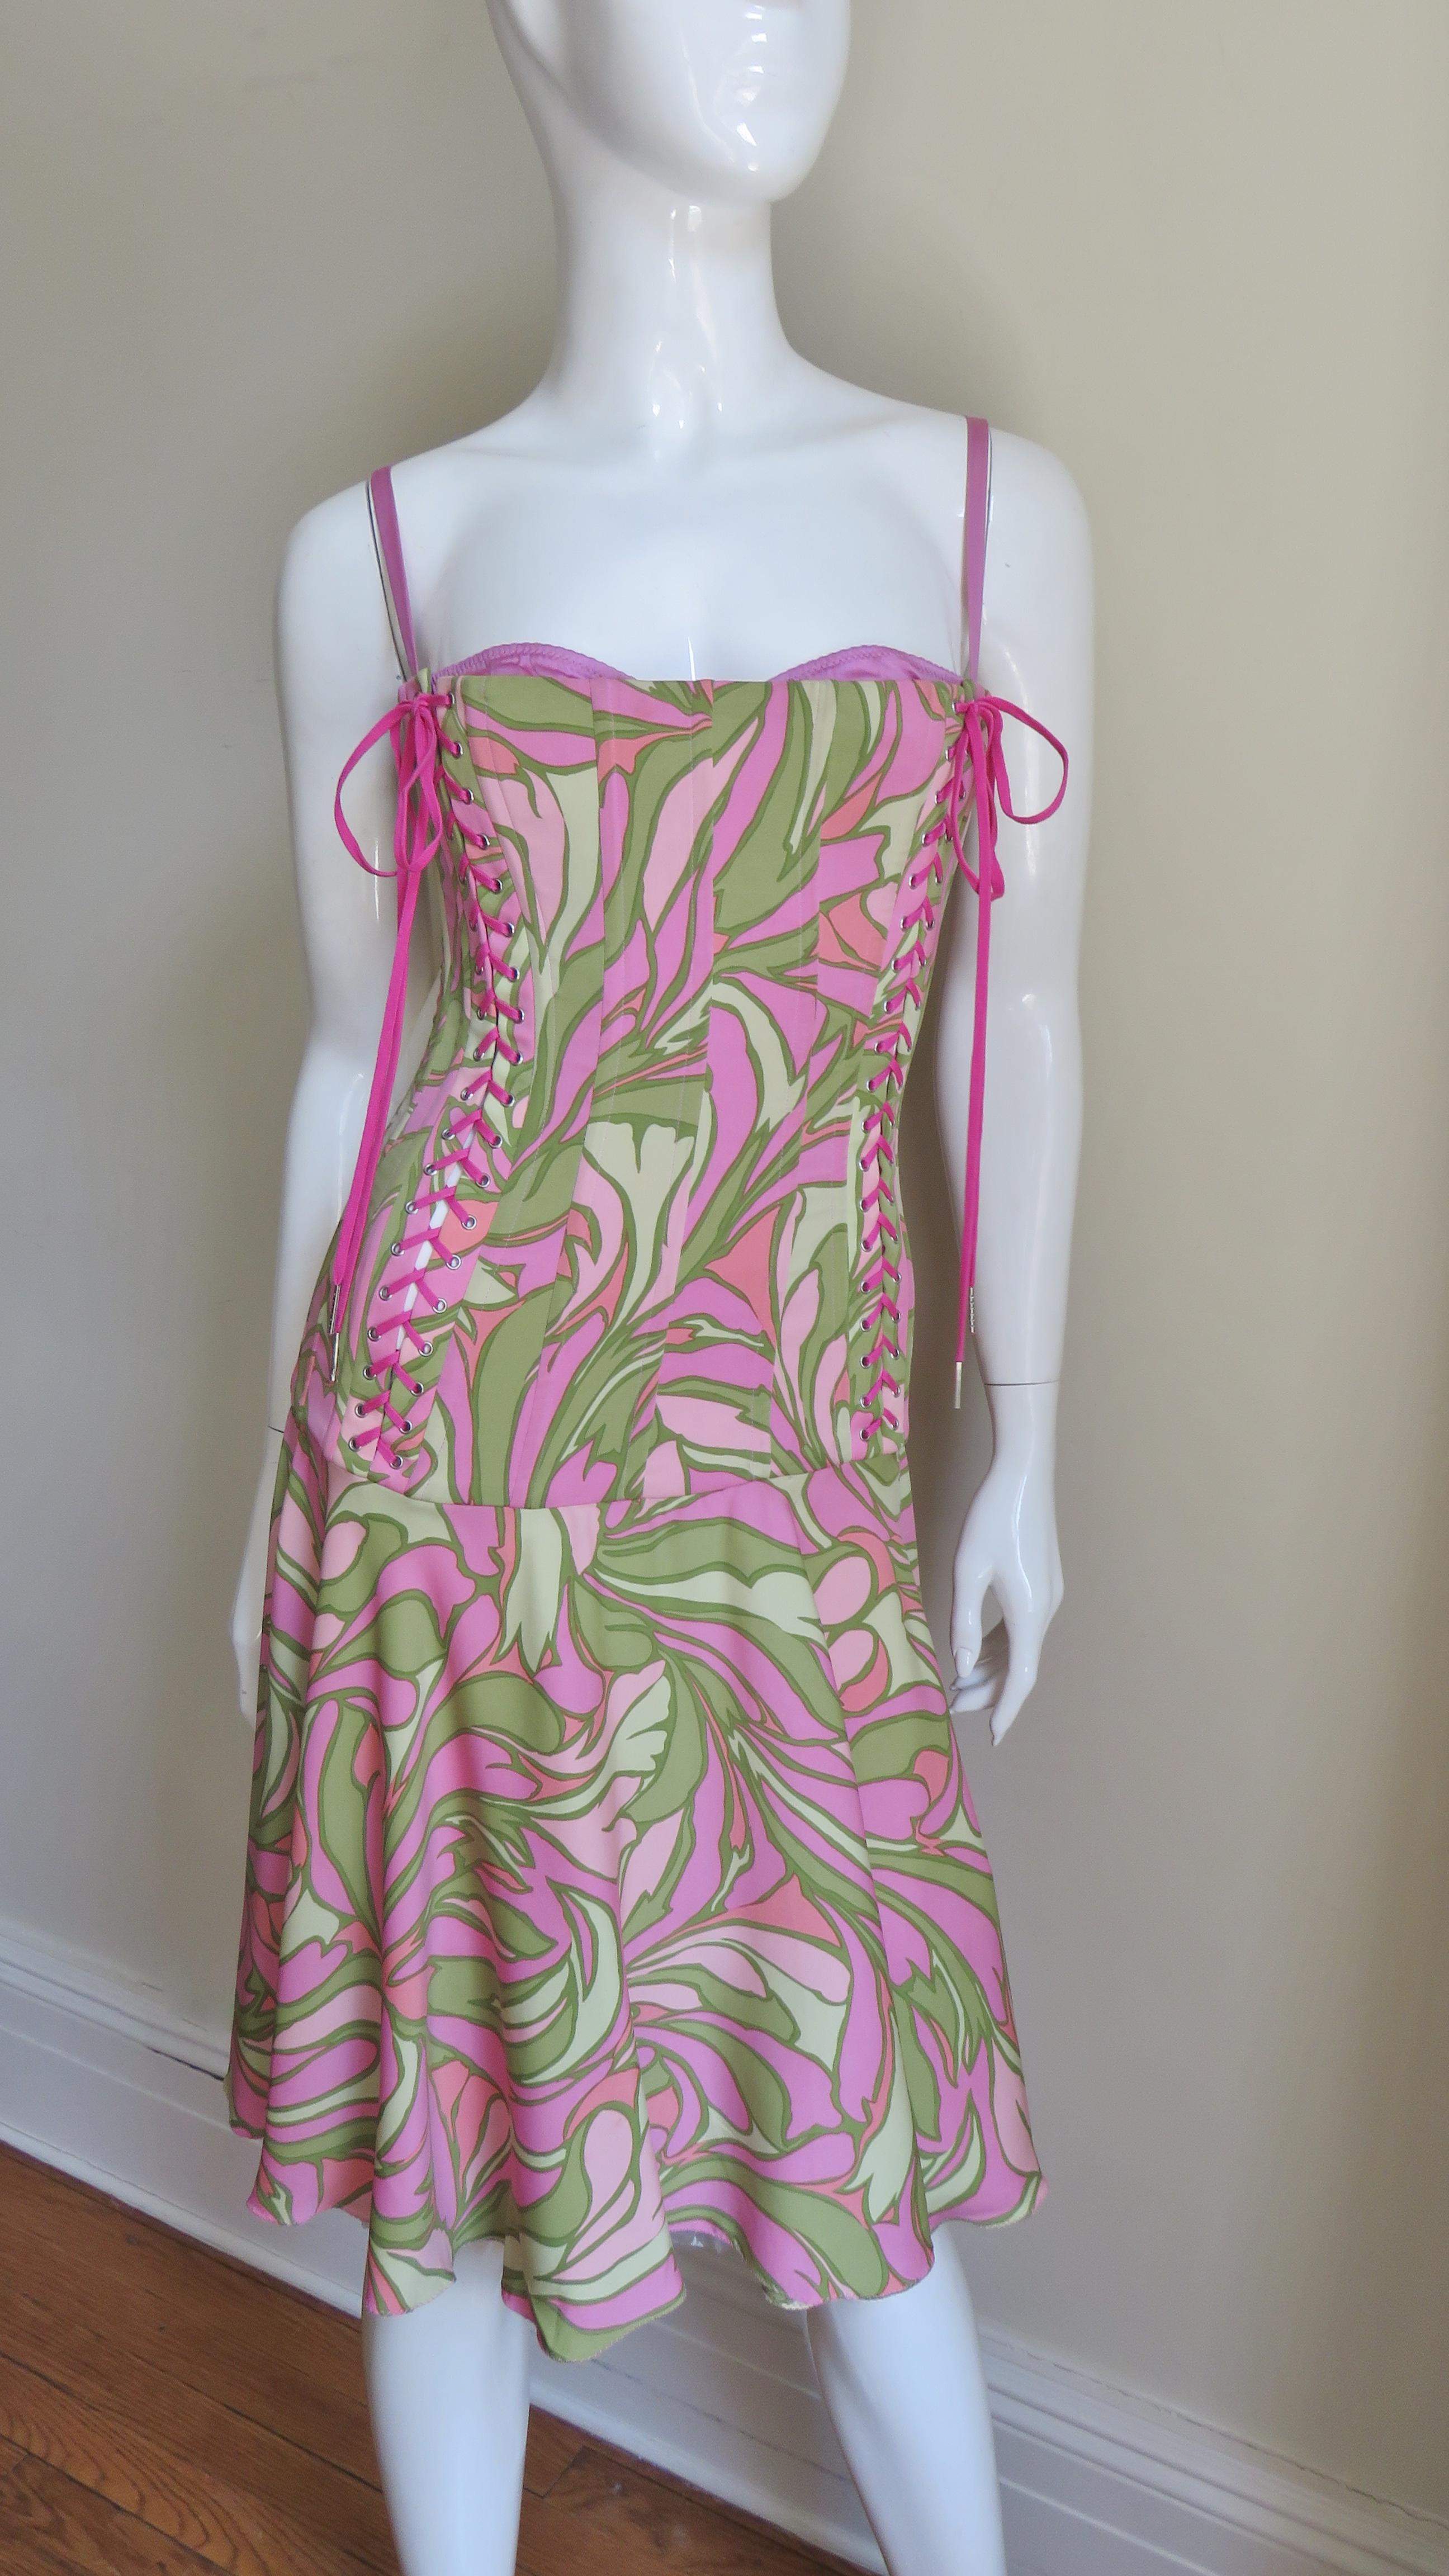 A beautiful silk dress in a pink and green geometric print from Dolce & Gabbana.  The bodice is vertically boned, fitted through to the hips and has an attached matching pink adjustable straps bra peeking out of the top of the dress. There are 2